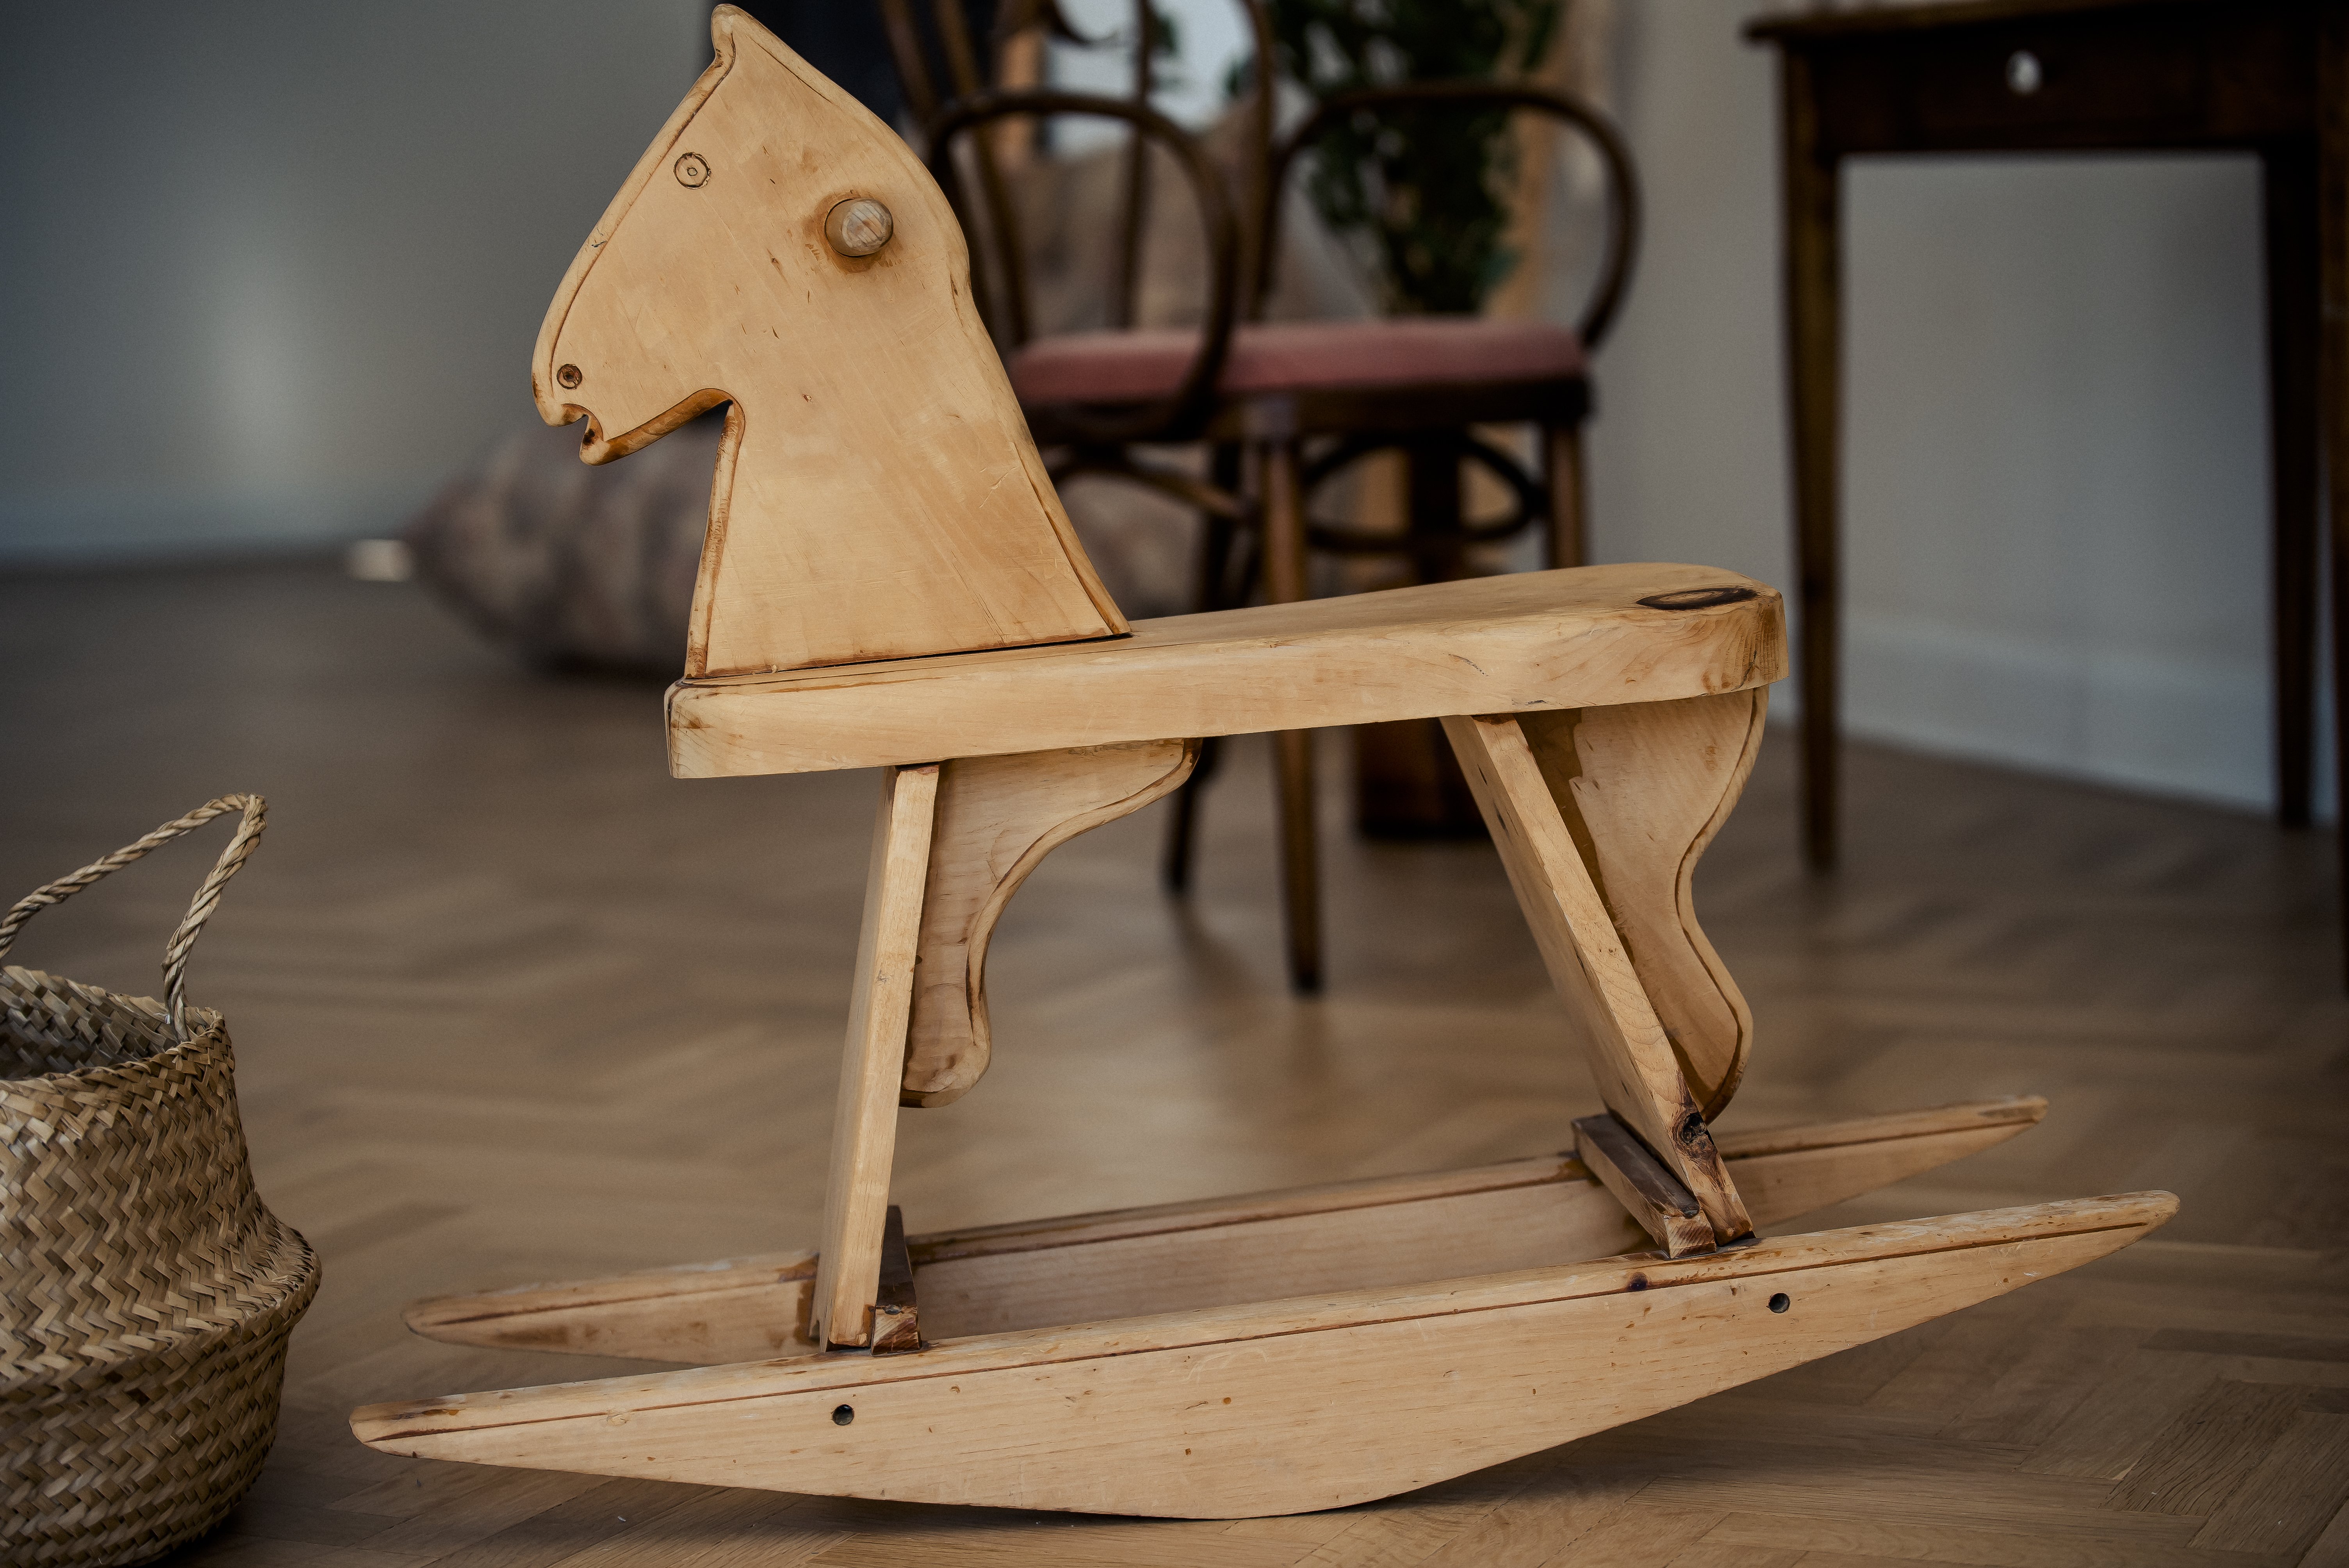 Oscar was surprised to find the same rocking horse that he and his friends had seen. | Source: Getty Images